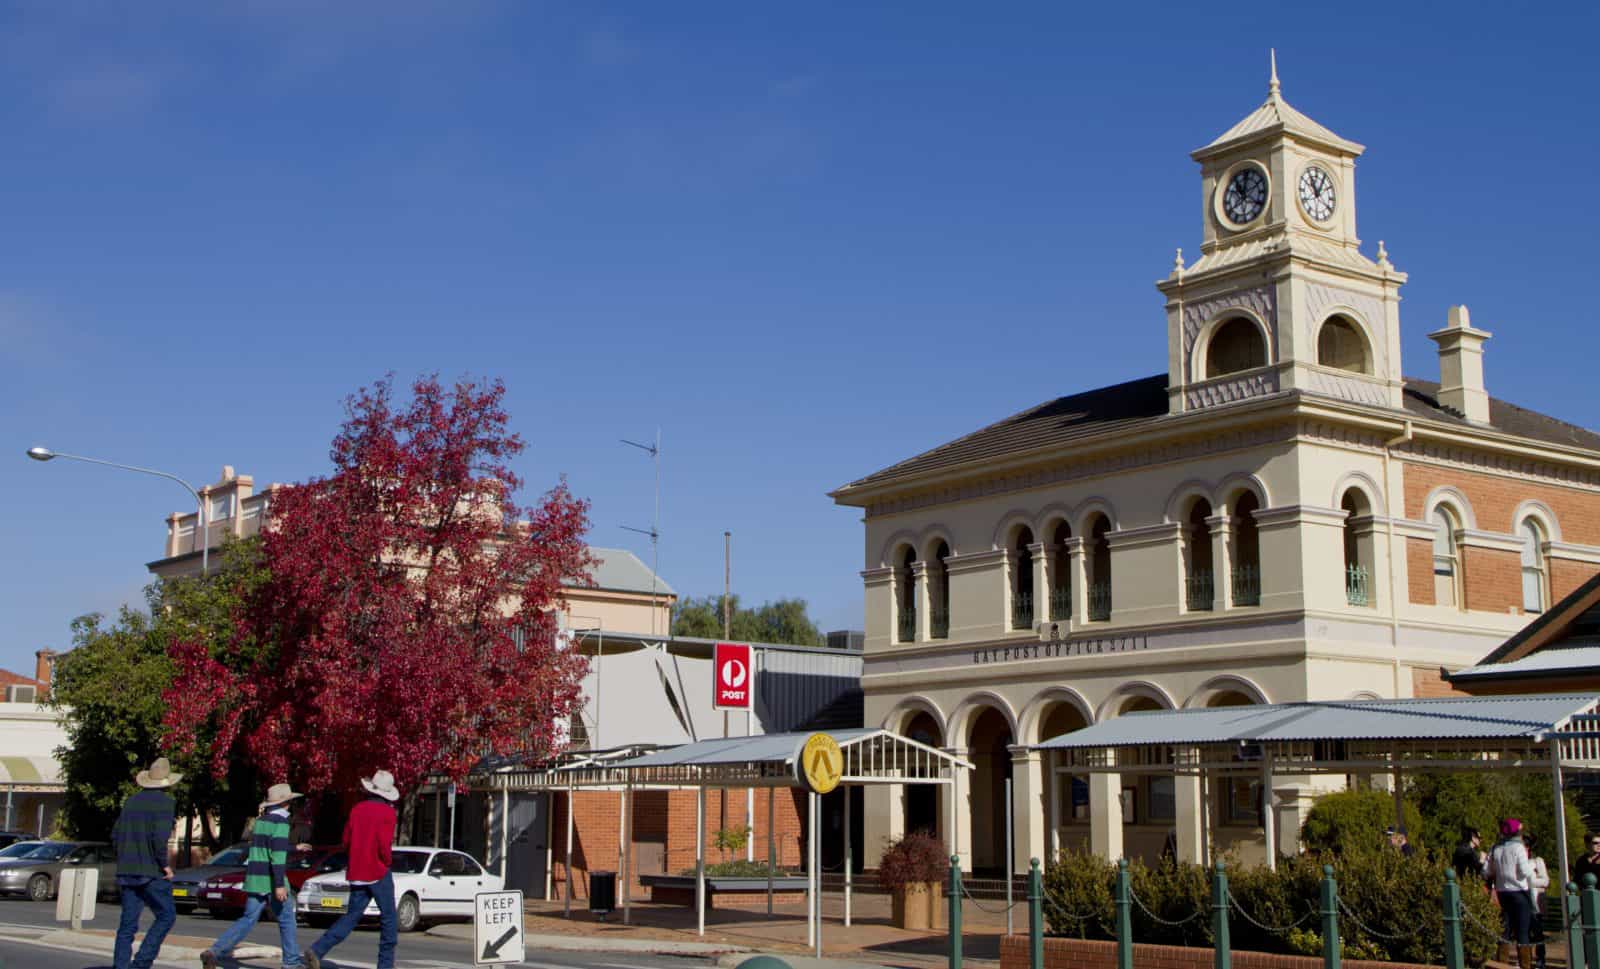 Main street of Hay, New South Wales, with Post Office